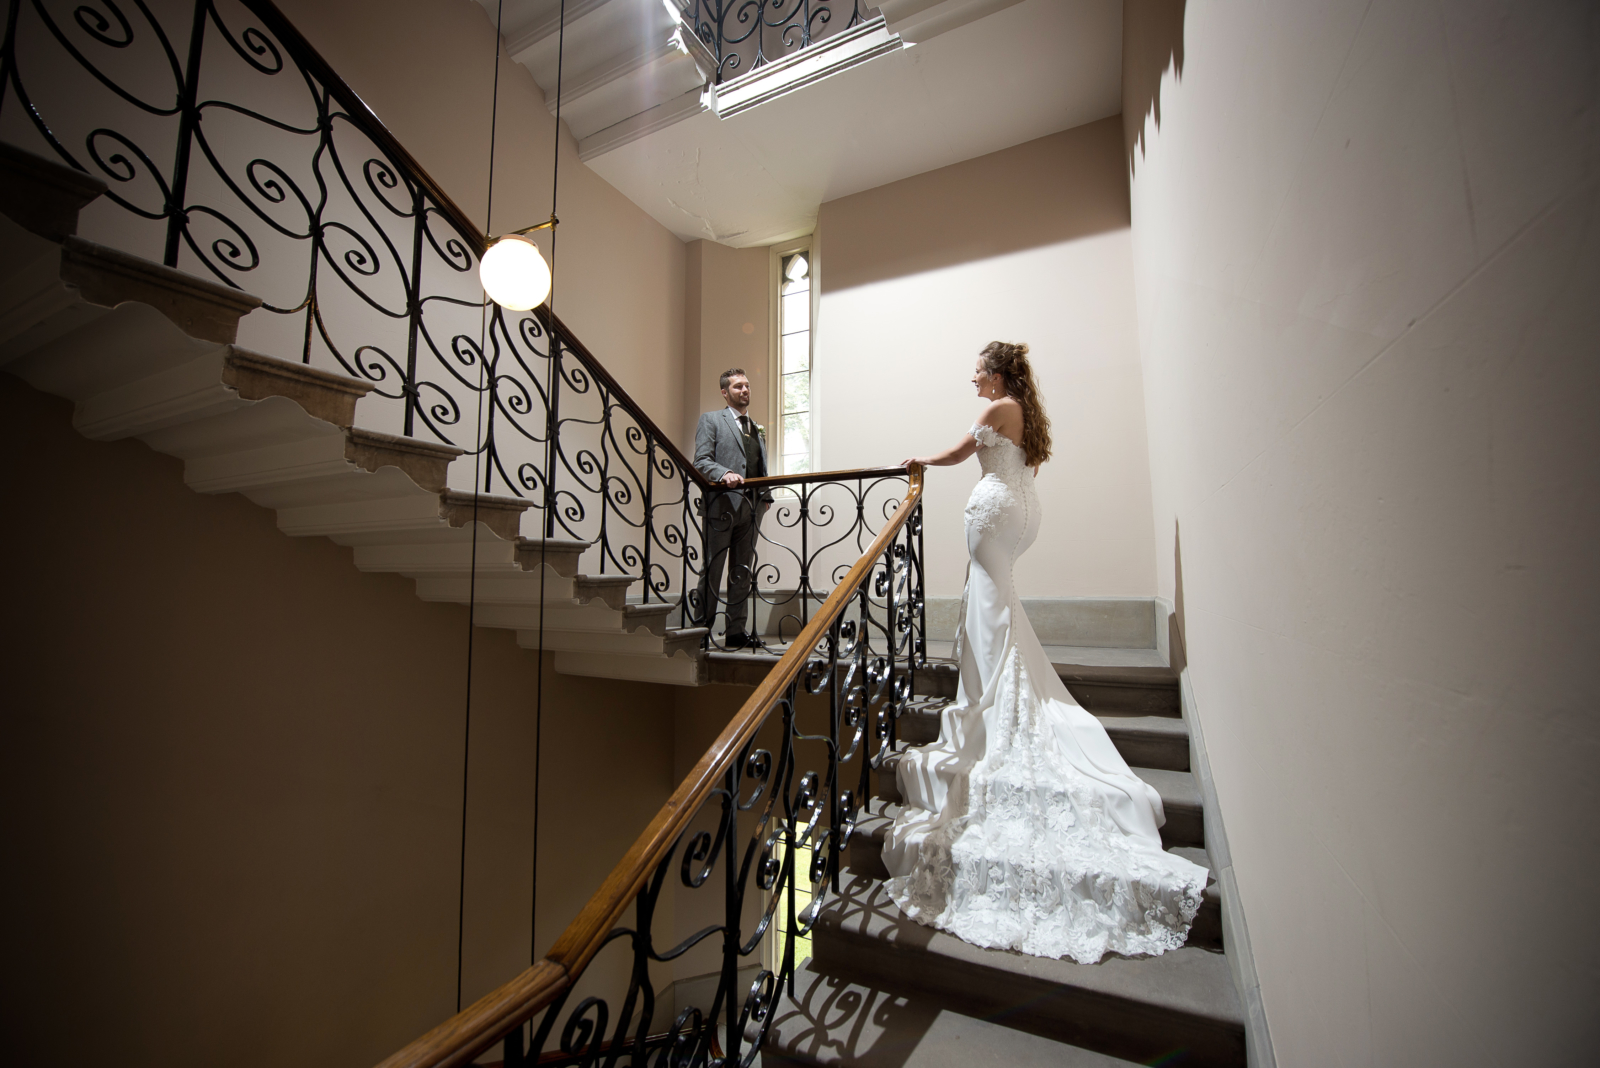 A bride and groom gaze at each other on the landing of a cantilevered staircase